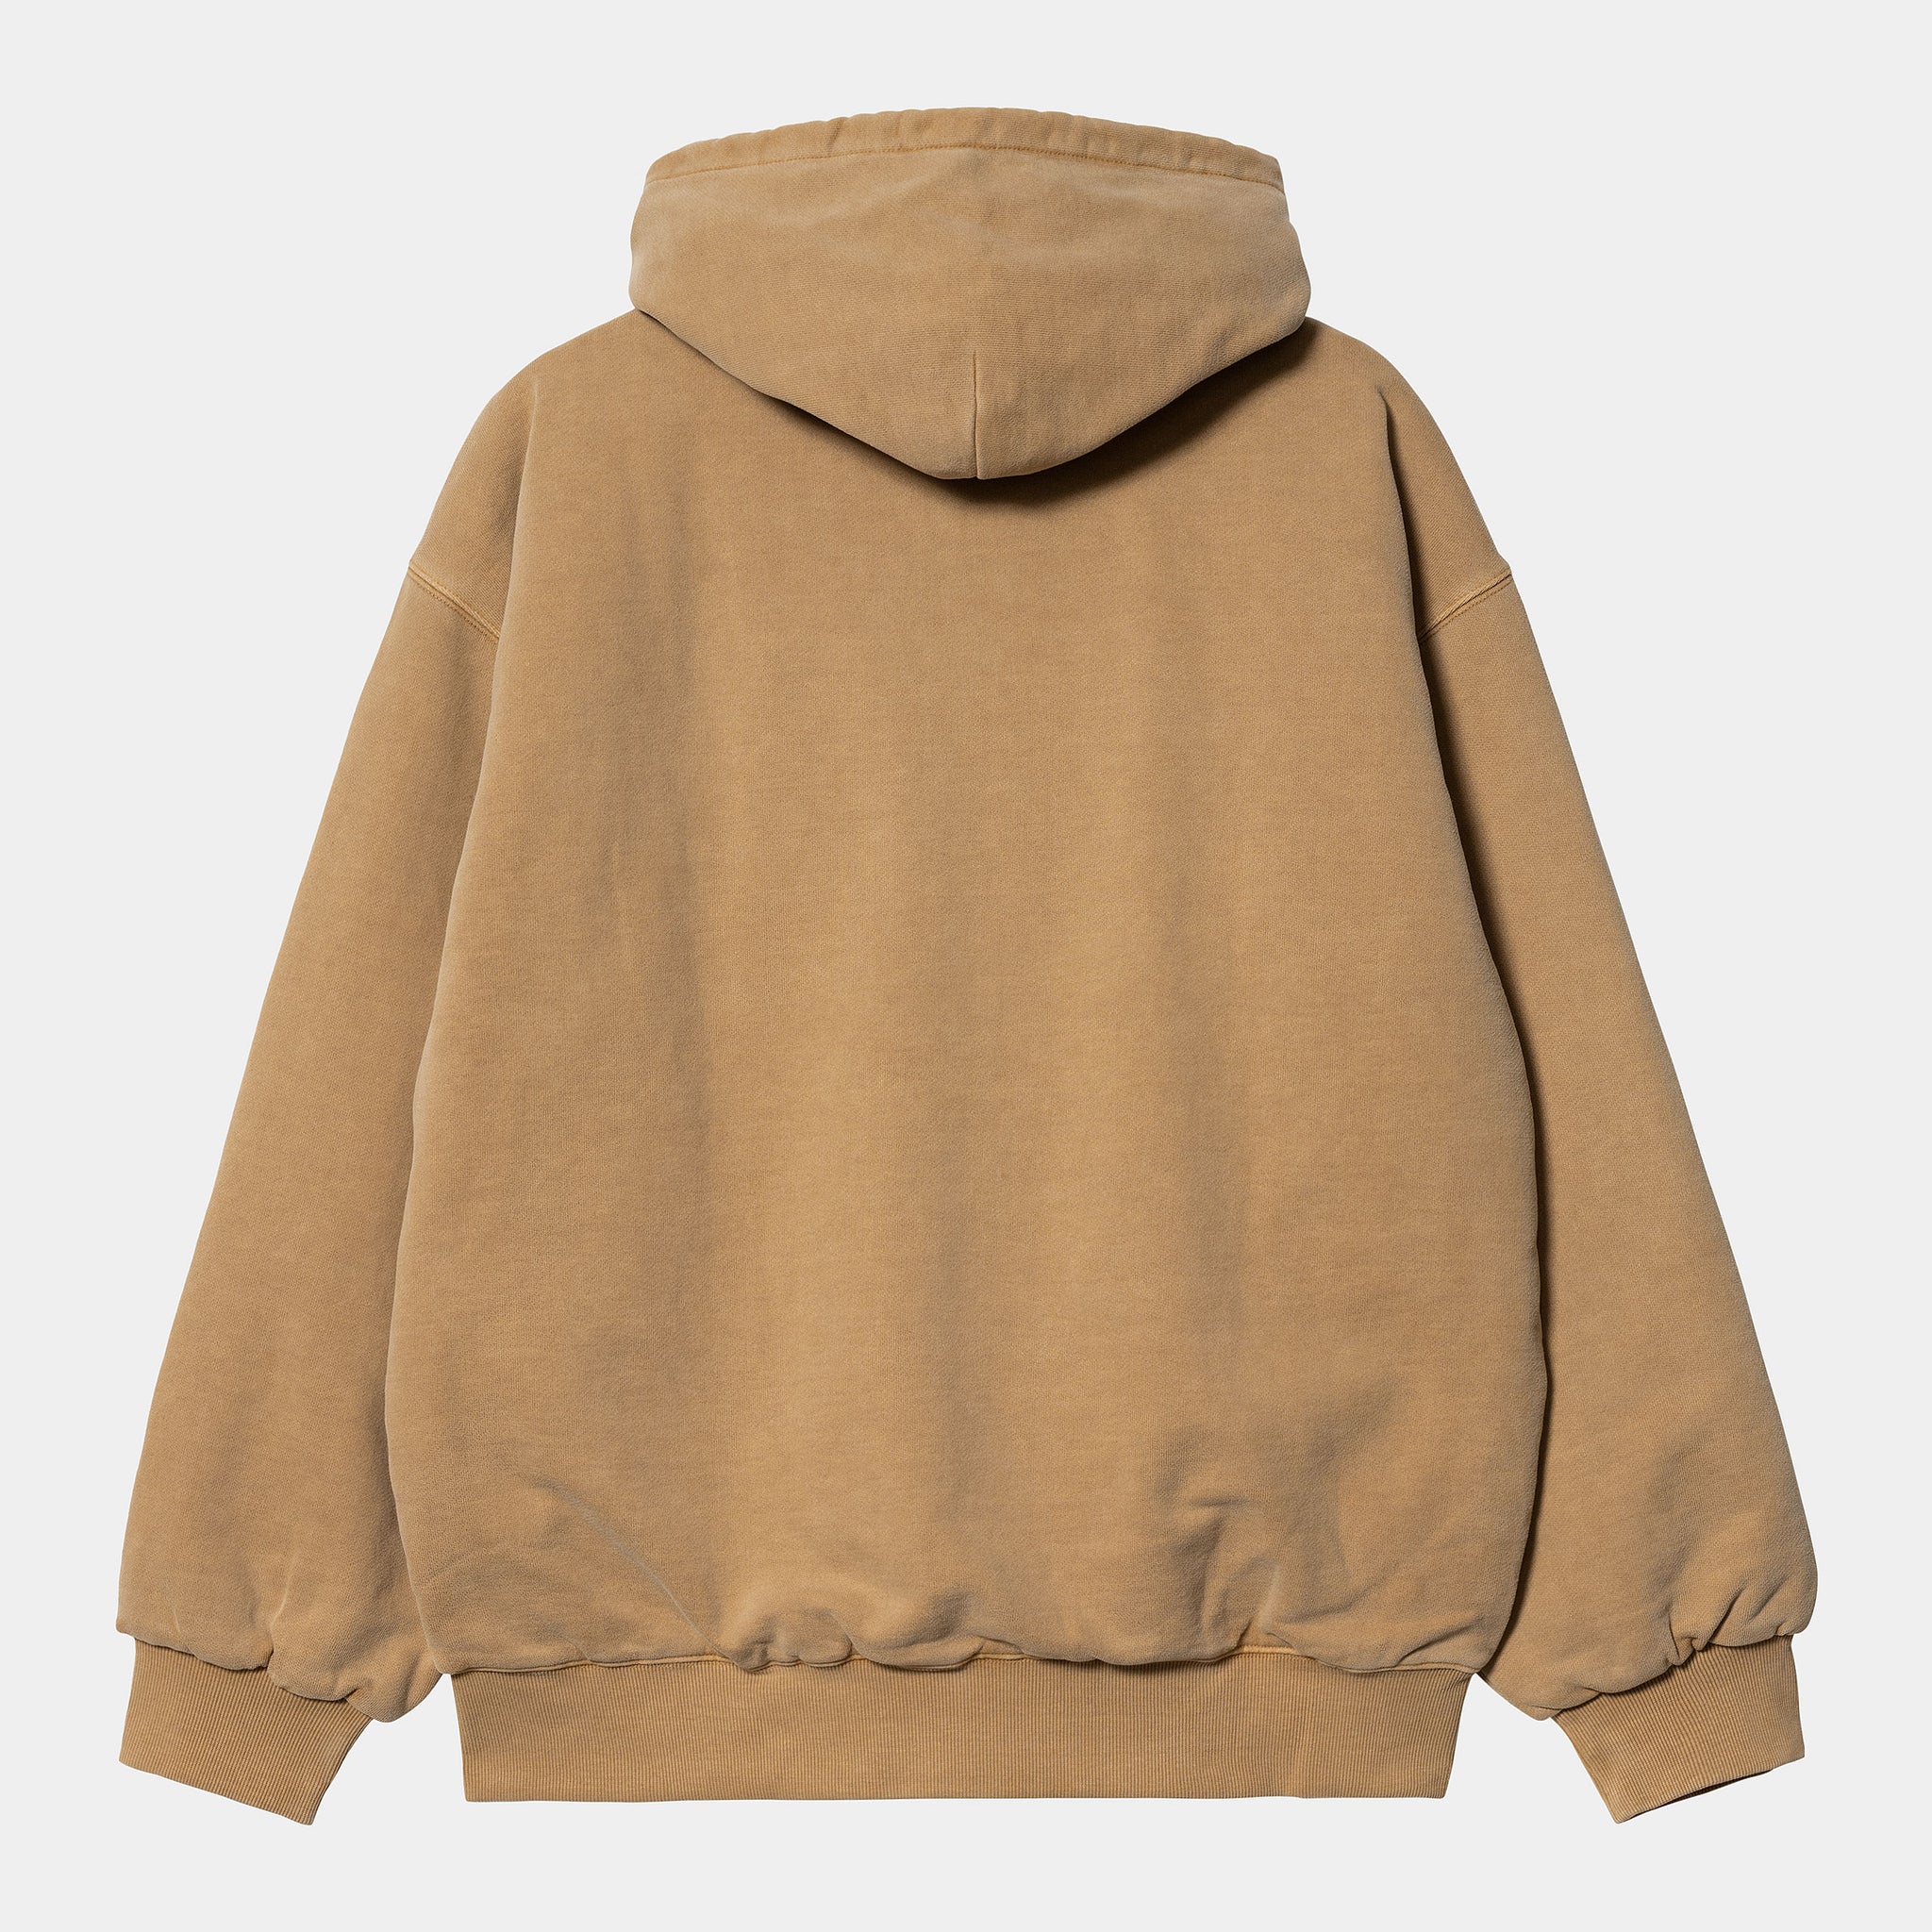 Hooded Vista Jacket (Dusty H Brown - garment dyed)